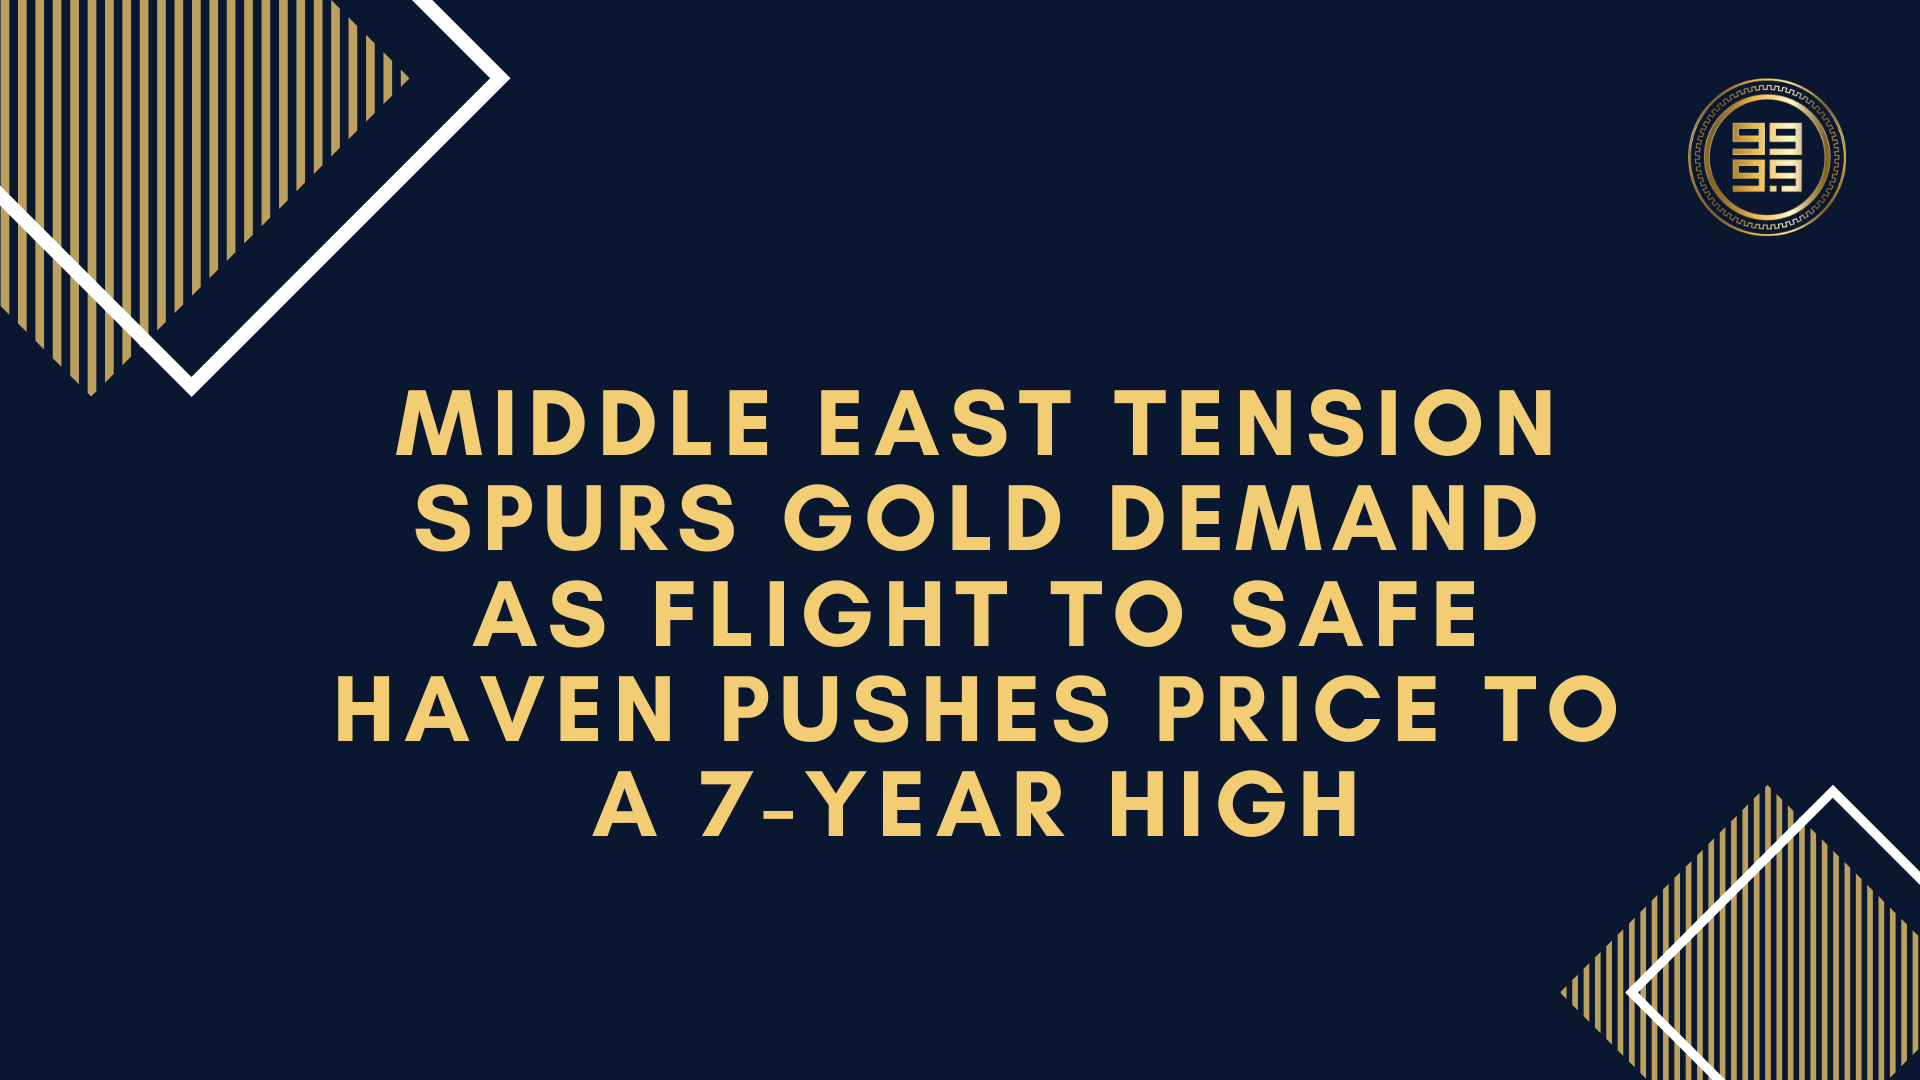 Middle-East-Tension-Spurs-Gold-Demand-as-Flight-to-Safe-Haven-Pushes-Price-to-a-7-Year-High